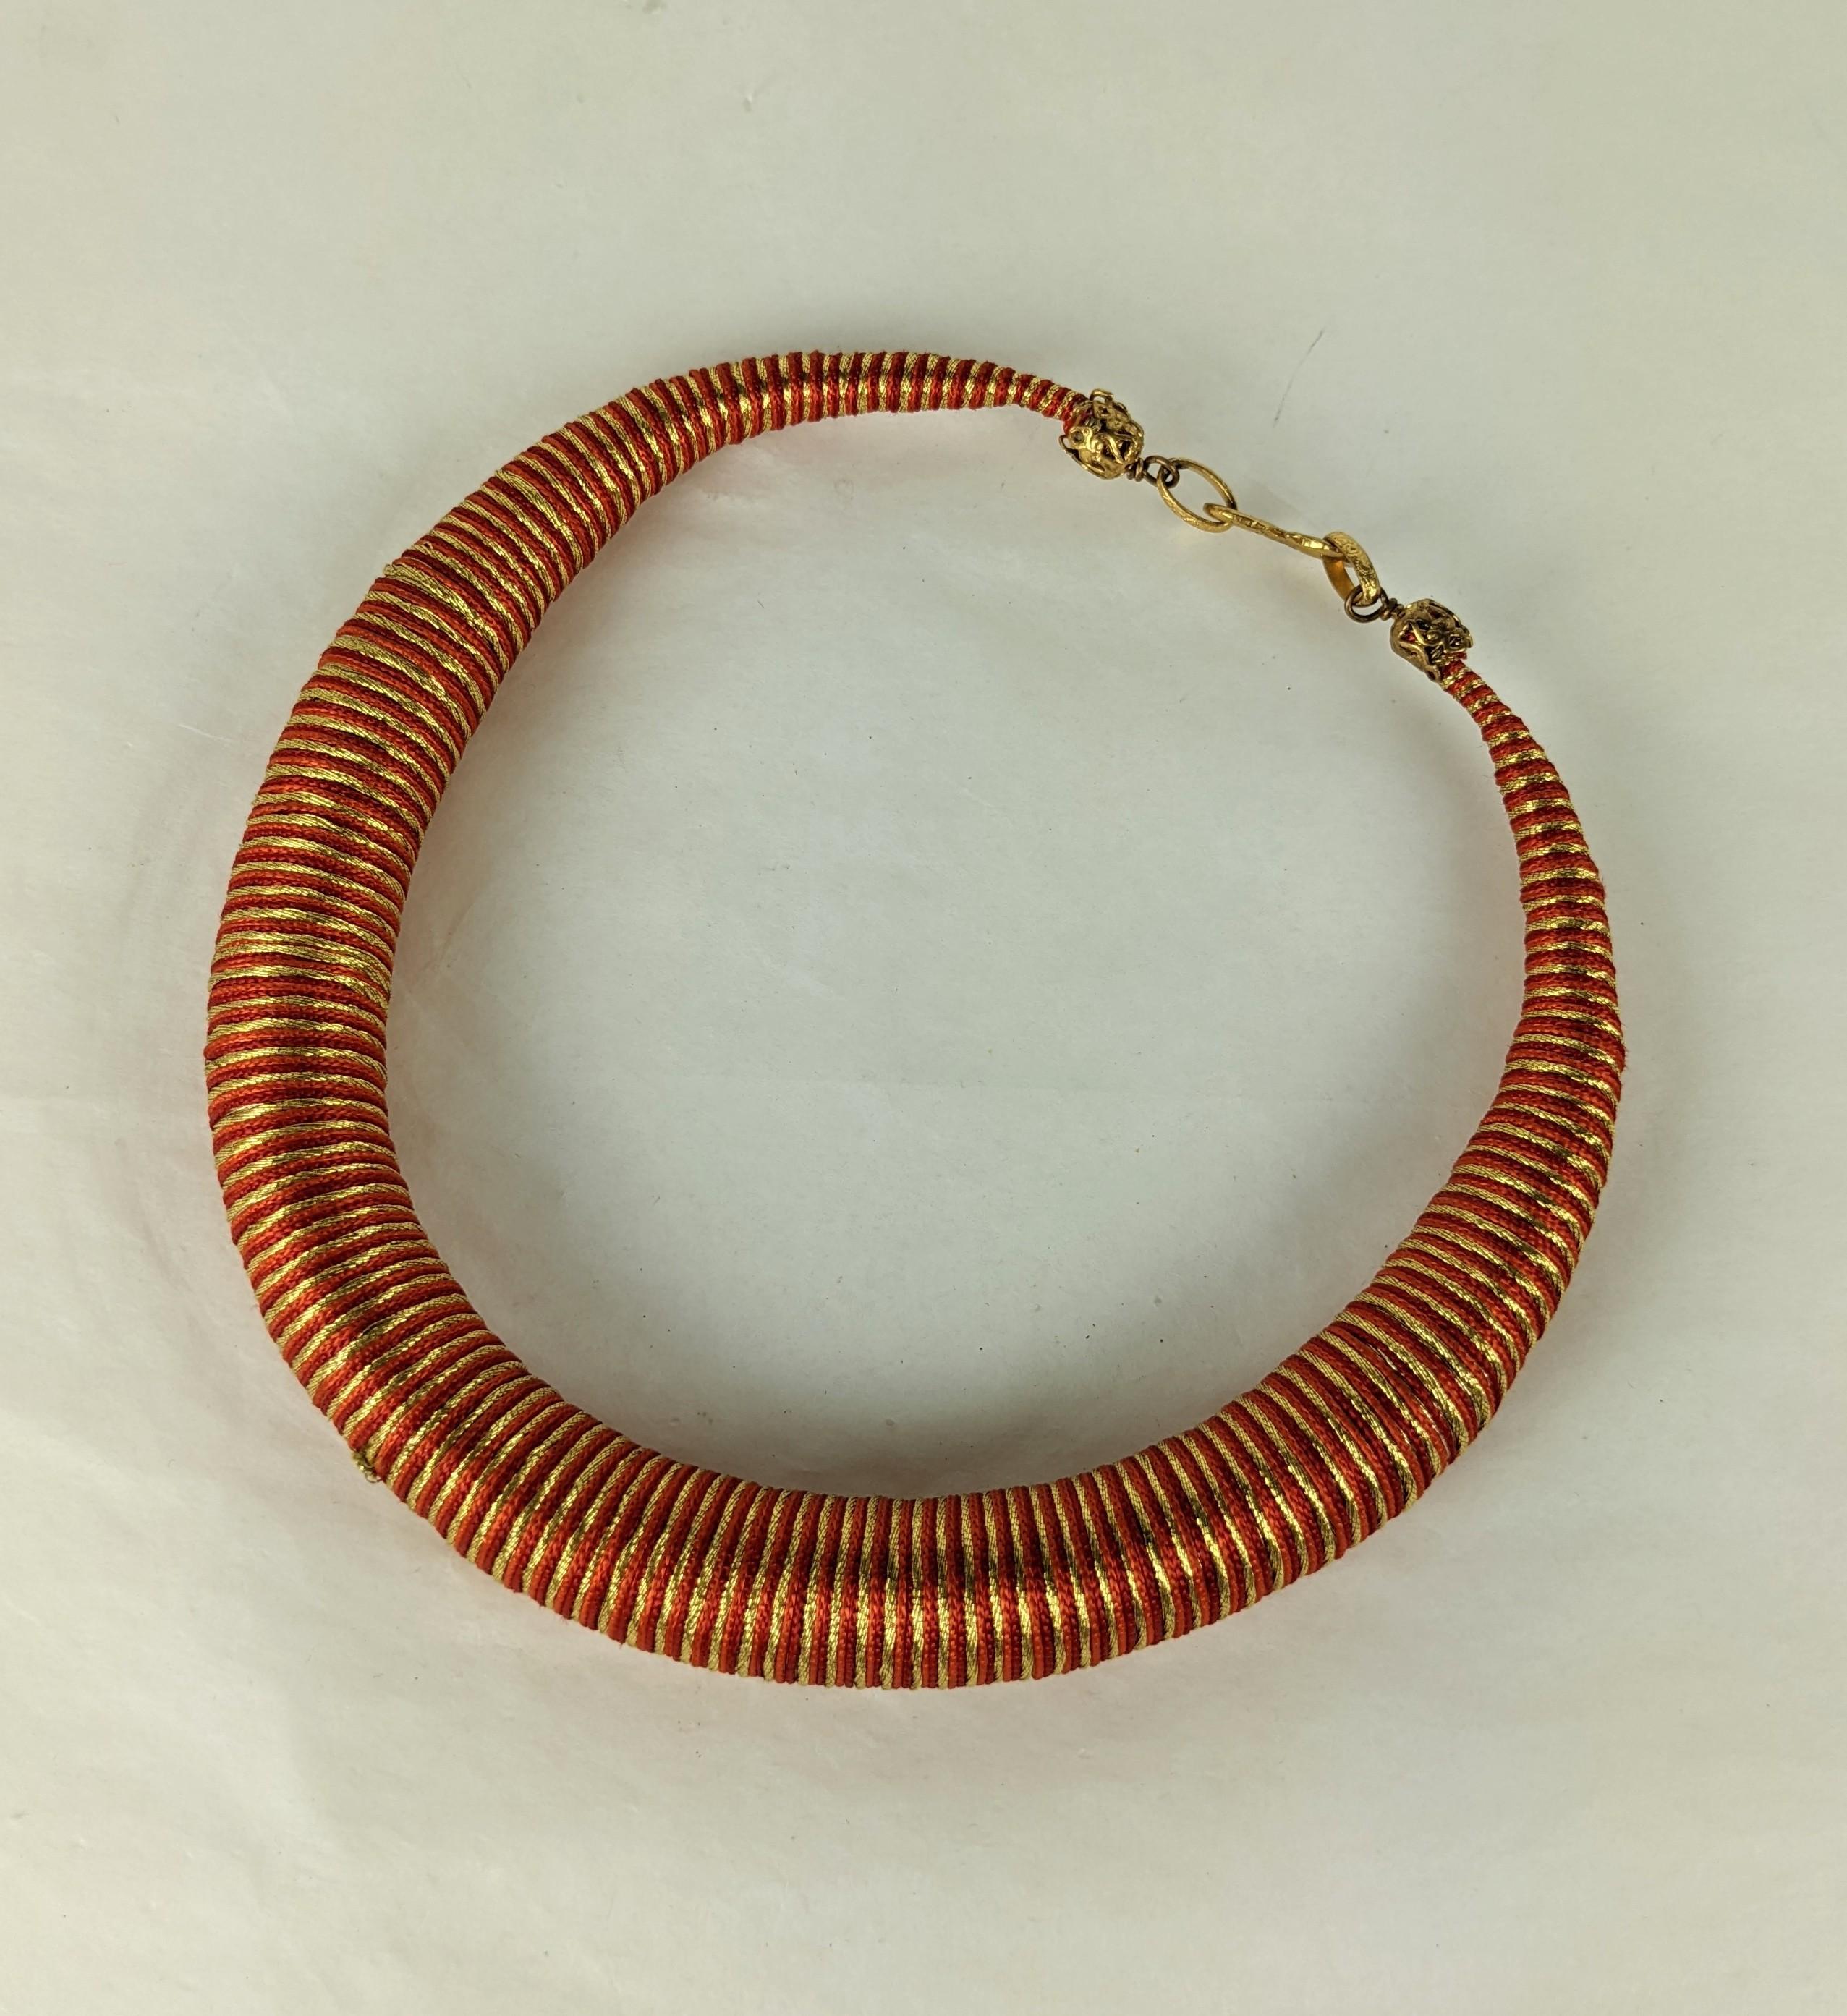 Rare Yves Saint Laurent  Russian Collection torque necklace from Fall-Winter 1976 Haute Couture collection. Deceptively constructed with a soft core tightly wrapped gold metallic, red and orange silk soutache passementerie cord, Signature Yves Saint